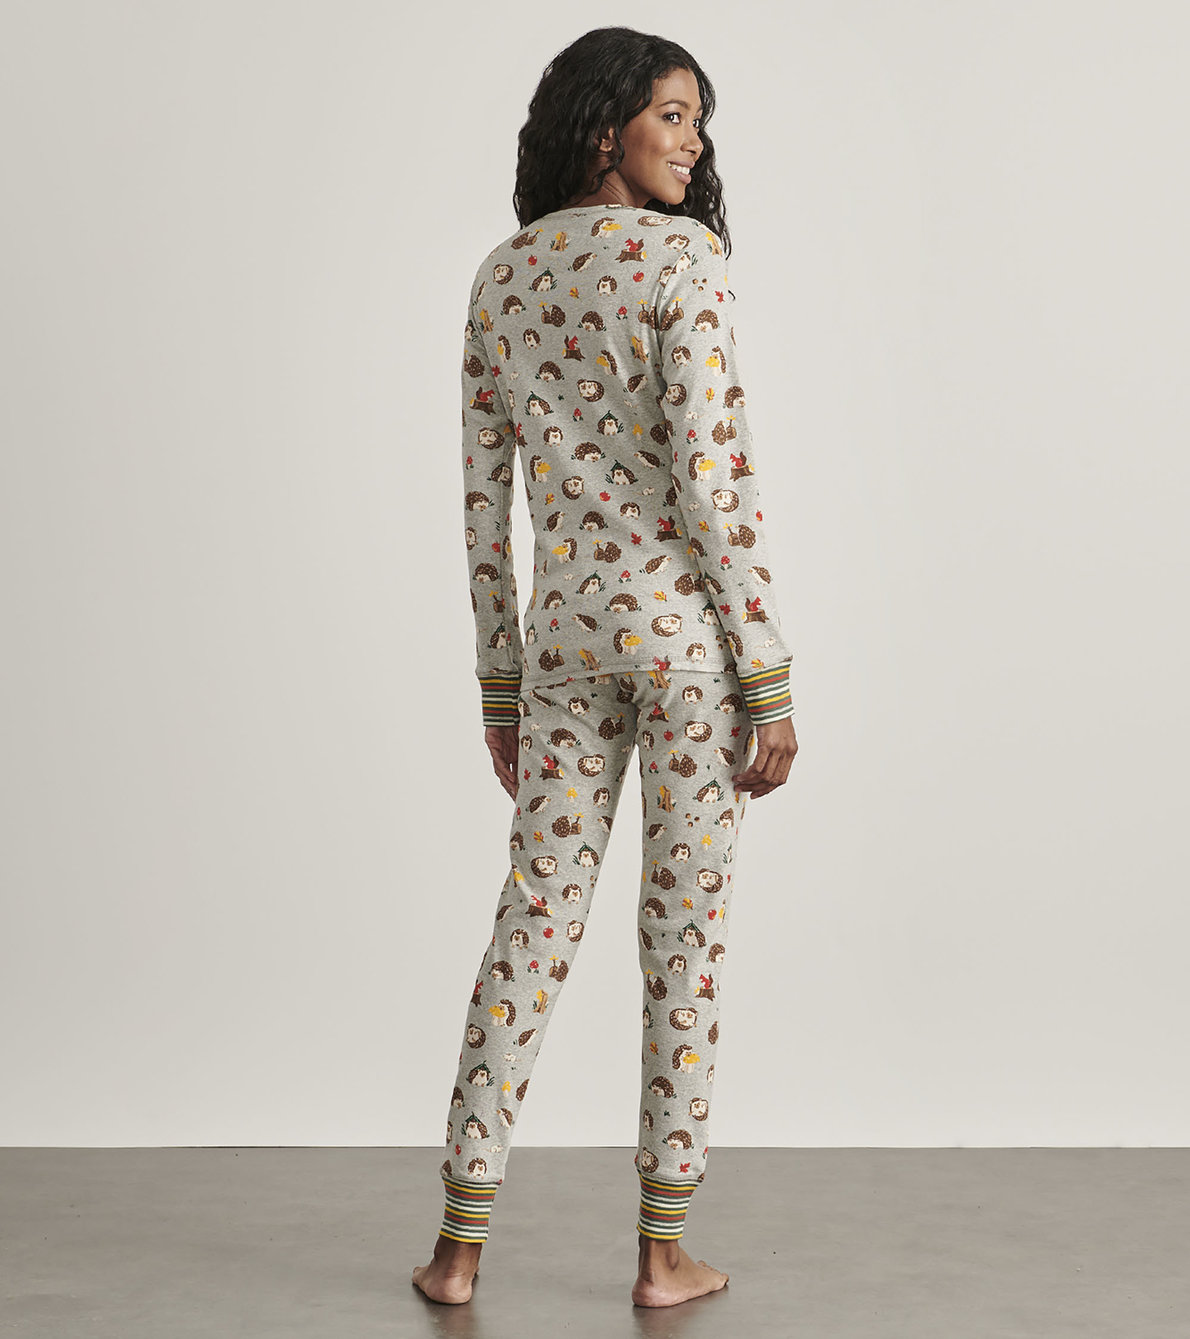 View larger image of Forest Creatures Women's Organic Cotton Pajama Set